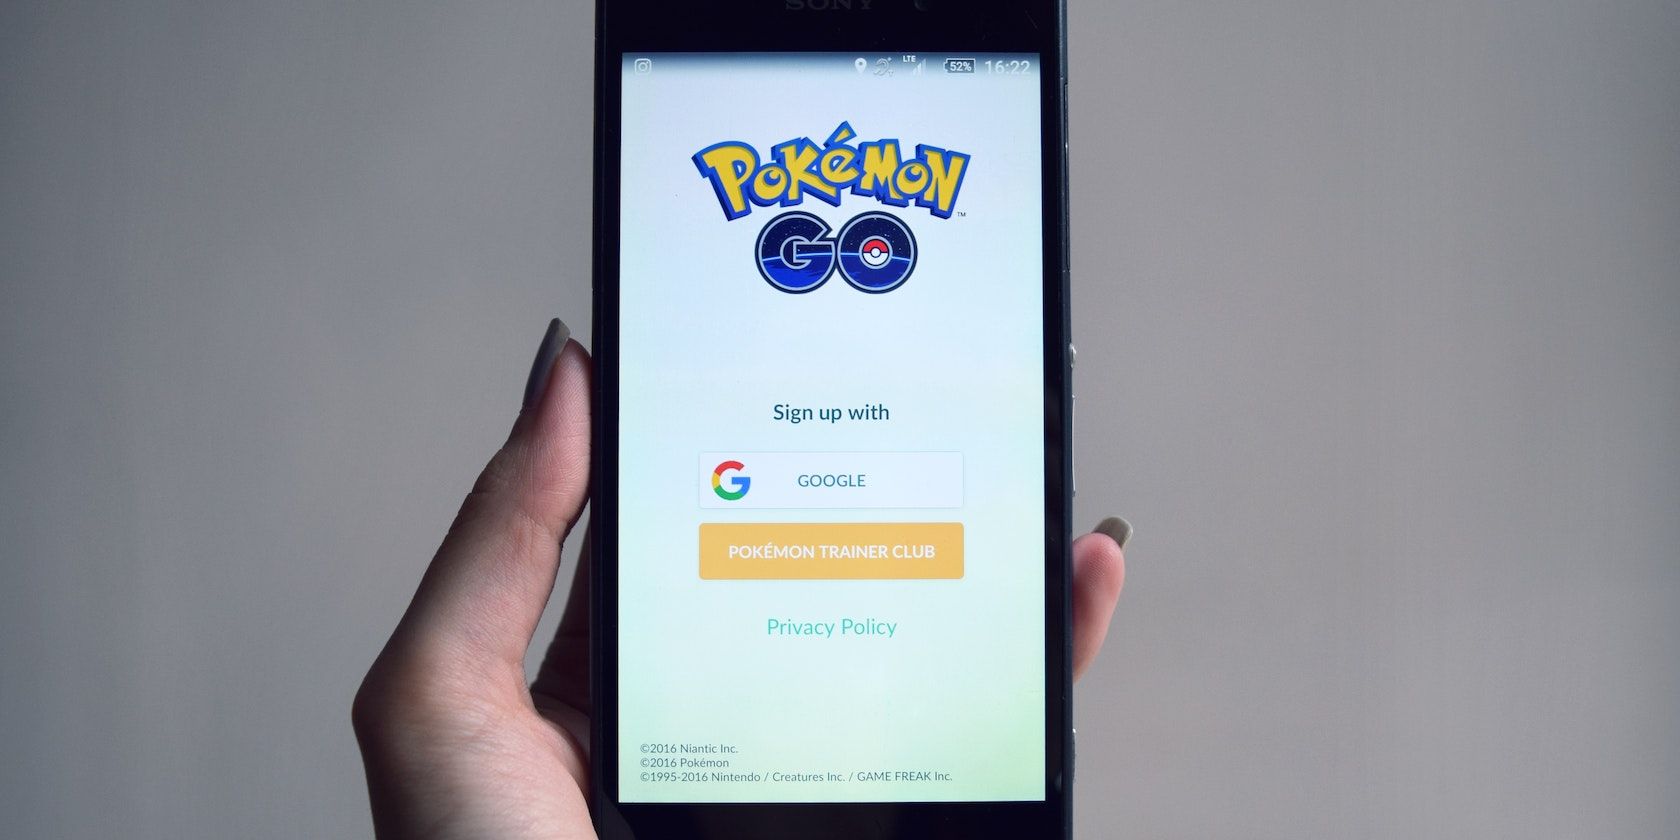 Android's Pokémon Go's sign up page